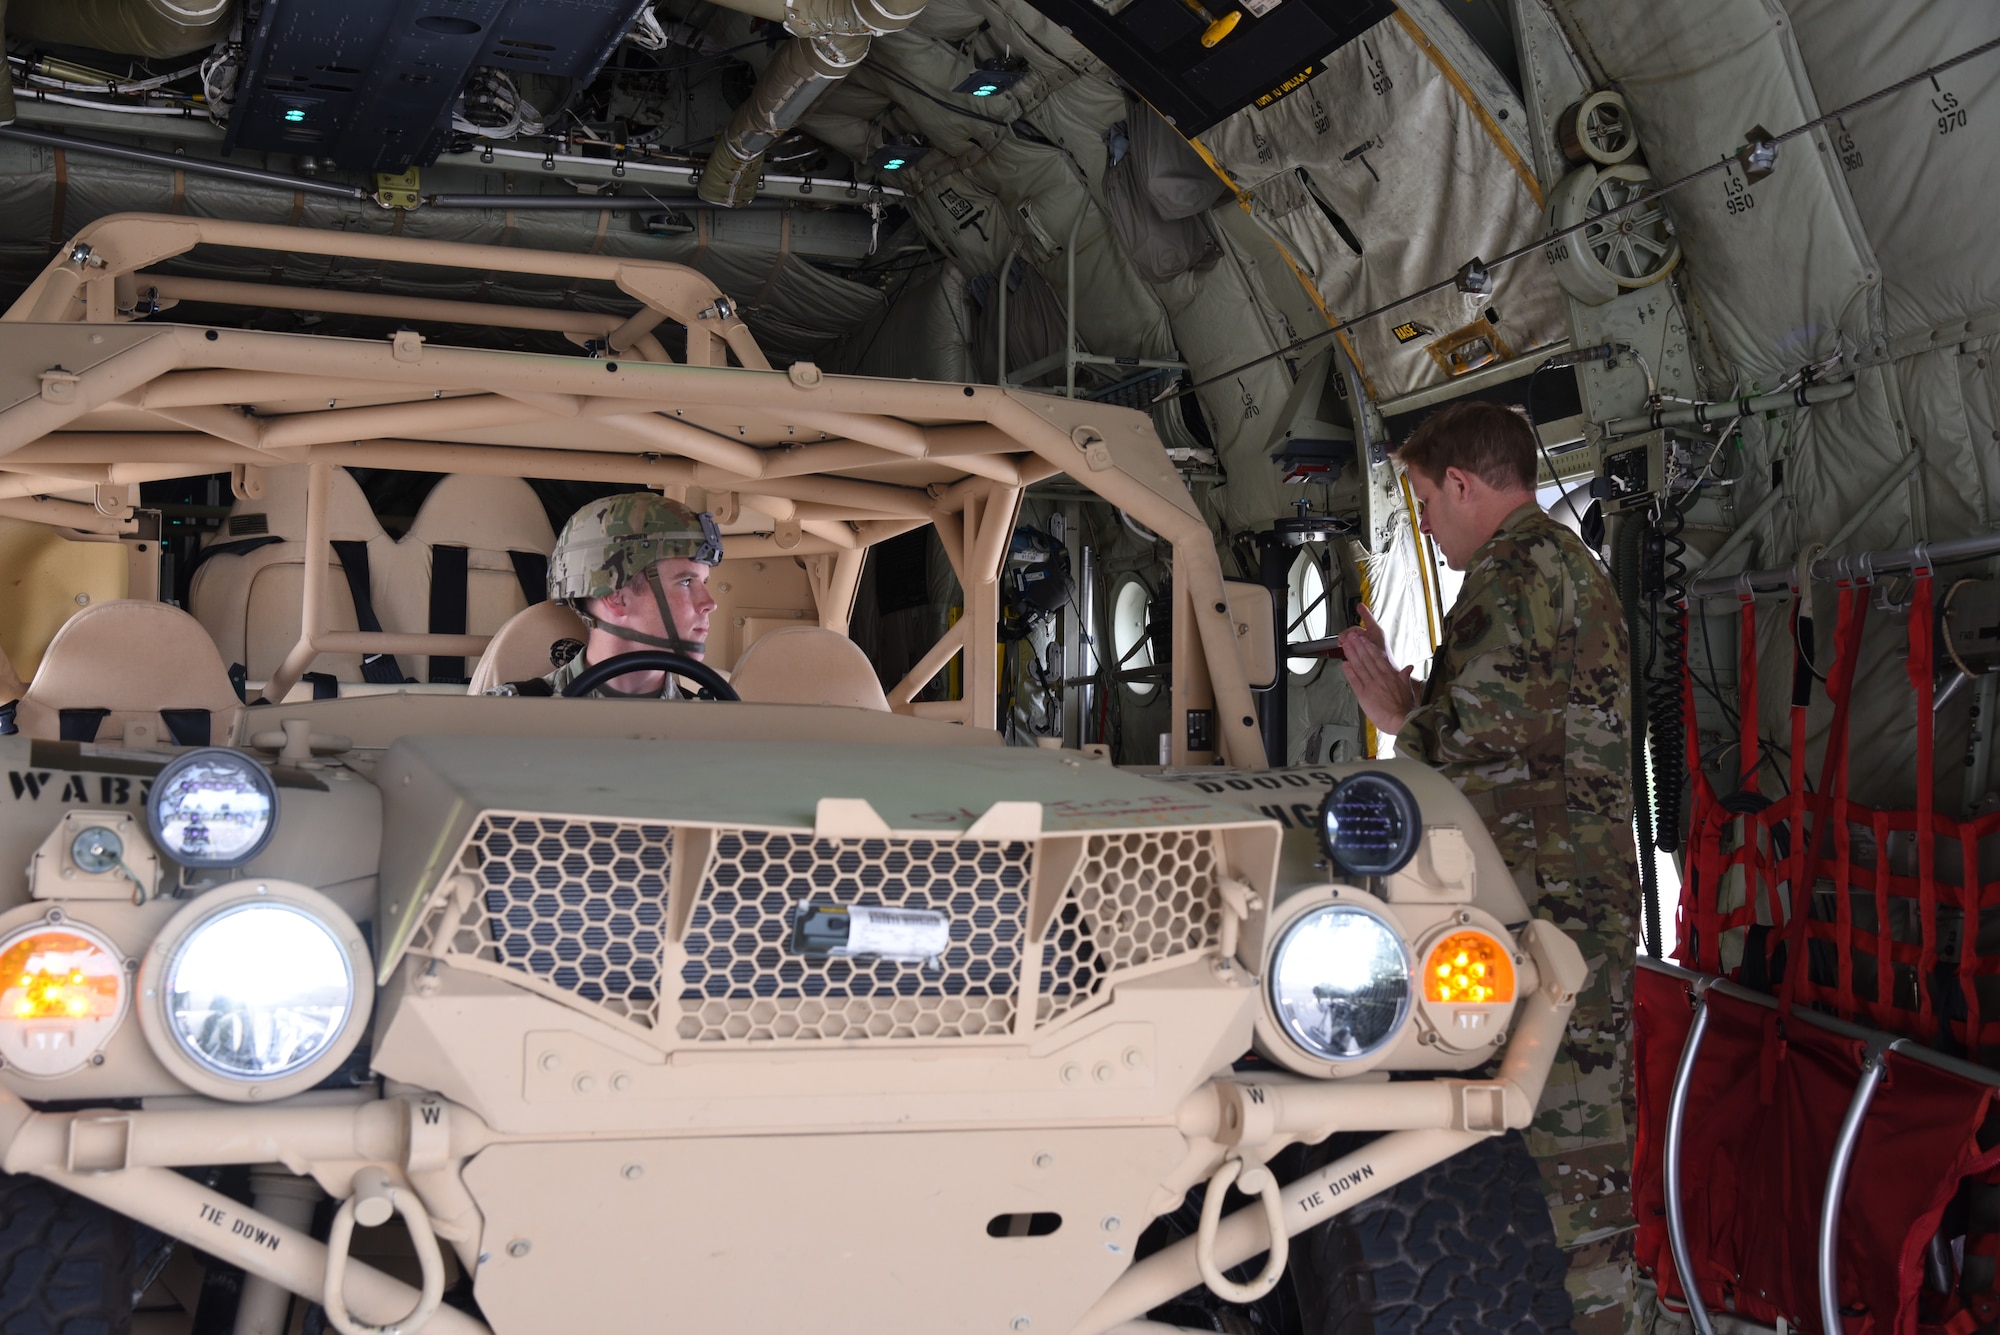 Senior Master Sgt. Eric Gassiot, a loadmaster with the 815th Airlift Squadron, 403rd Wing, explains the procedures for vehicle operations to Corporal Jared Guden, 82nd Airborne, scout platoon team leader, after he drove a ground mobility vehicle onto a C-130J in preparation for exercise Swift Response 19, June 14, 2019. The exercise is one of the premier military crisis response training events featuring high readiness airborne forces from eight NATO nations. Activities include intermediate staging base operations, multiple airborne operations, and several air assault operations. The Swift Response exercises have had great success in creating a foundation for the strong relationships we share with several European allies and partners today. (U.S. Air Force photo by Master Sgt. Jessica Kendziorek)